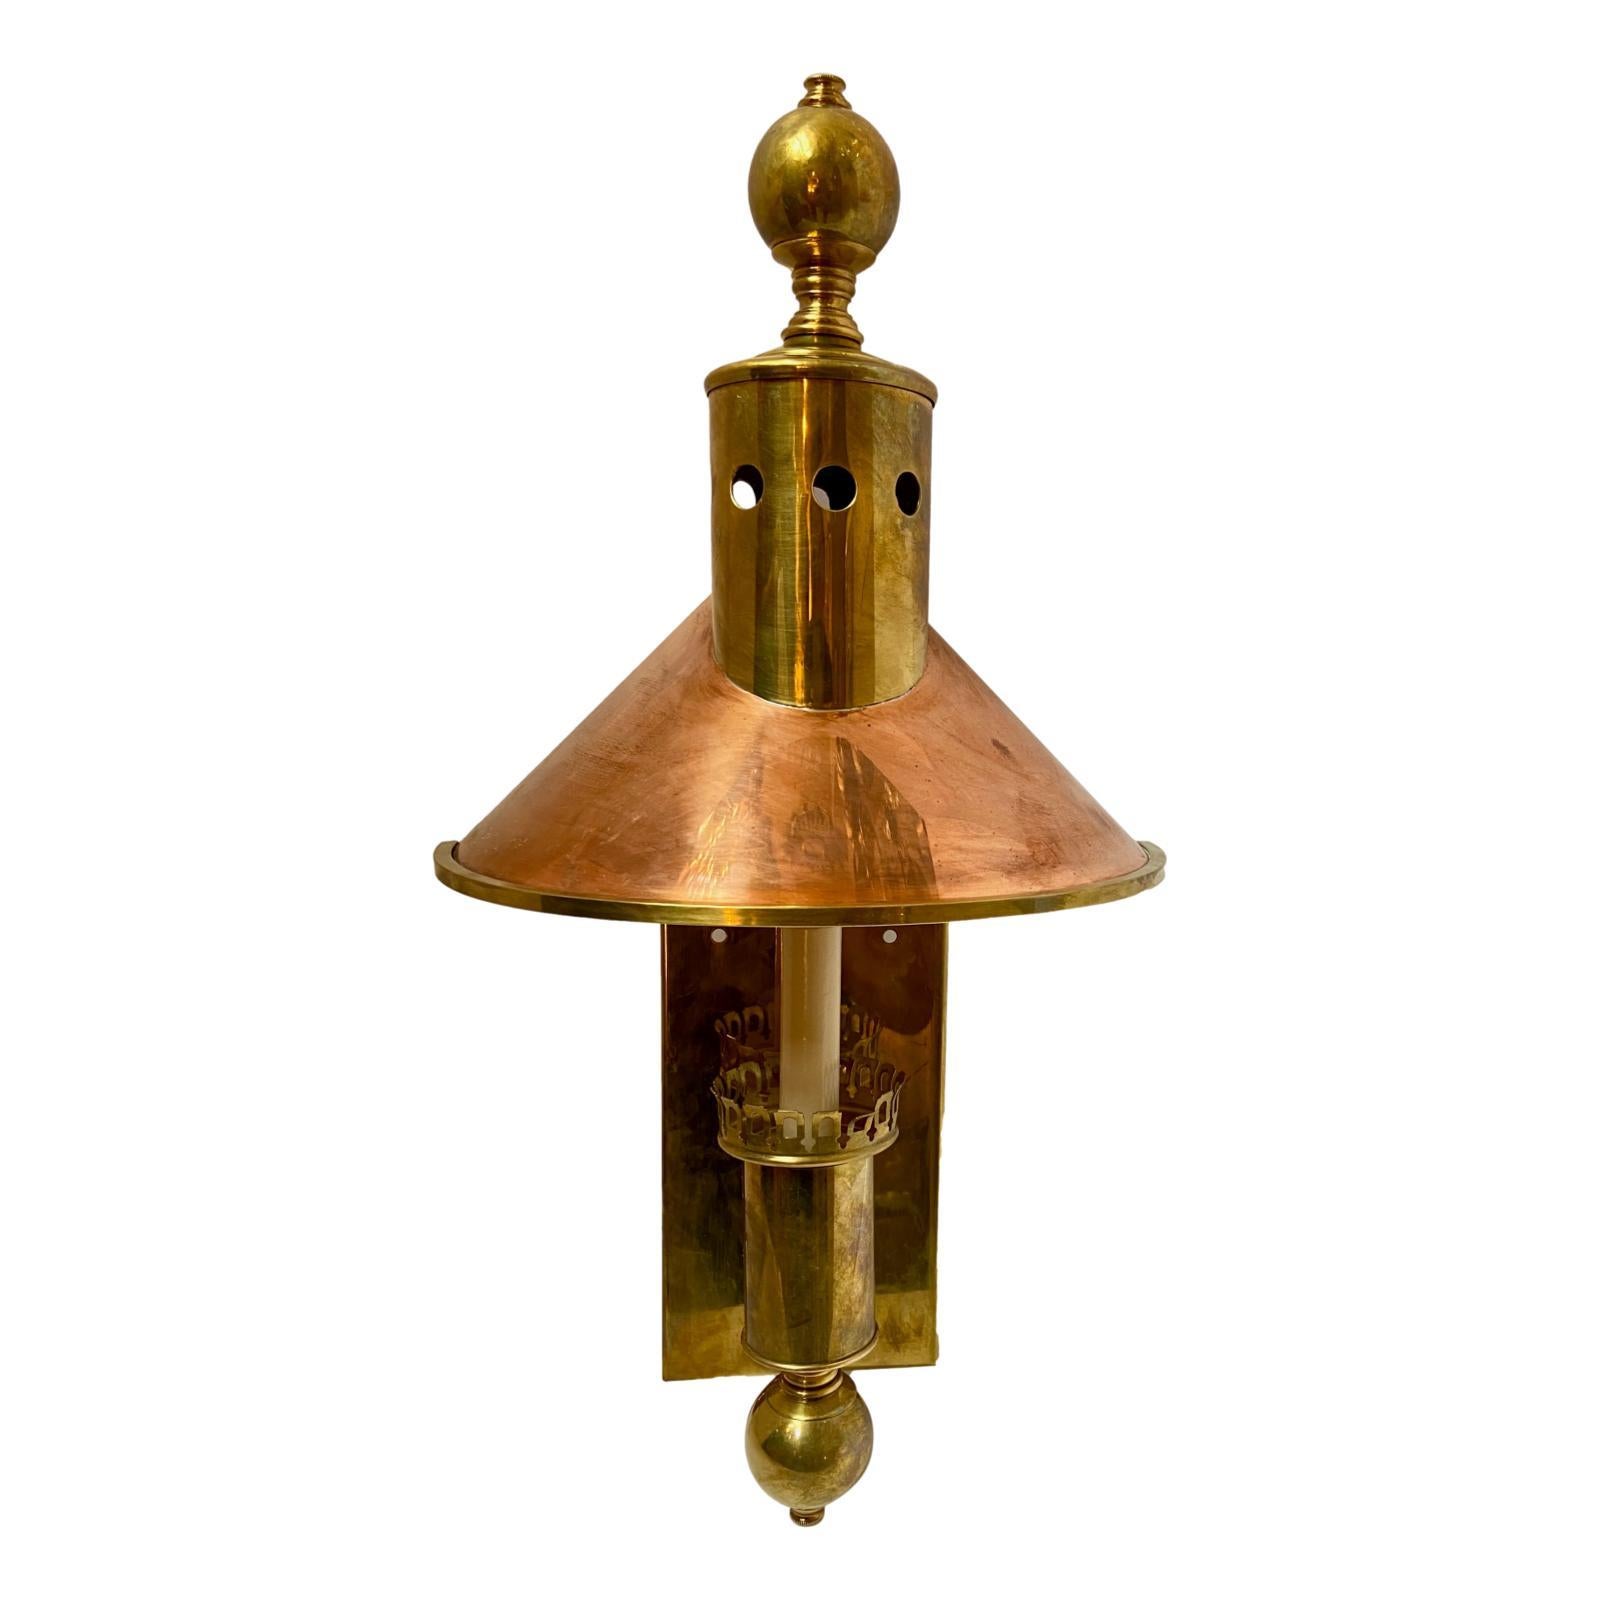 A pair of circa 1950's English single-light copper sconces with brass backplate.

Measurements:
Height: 21